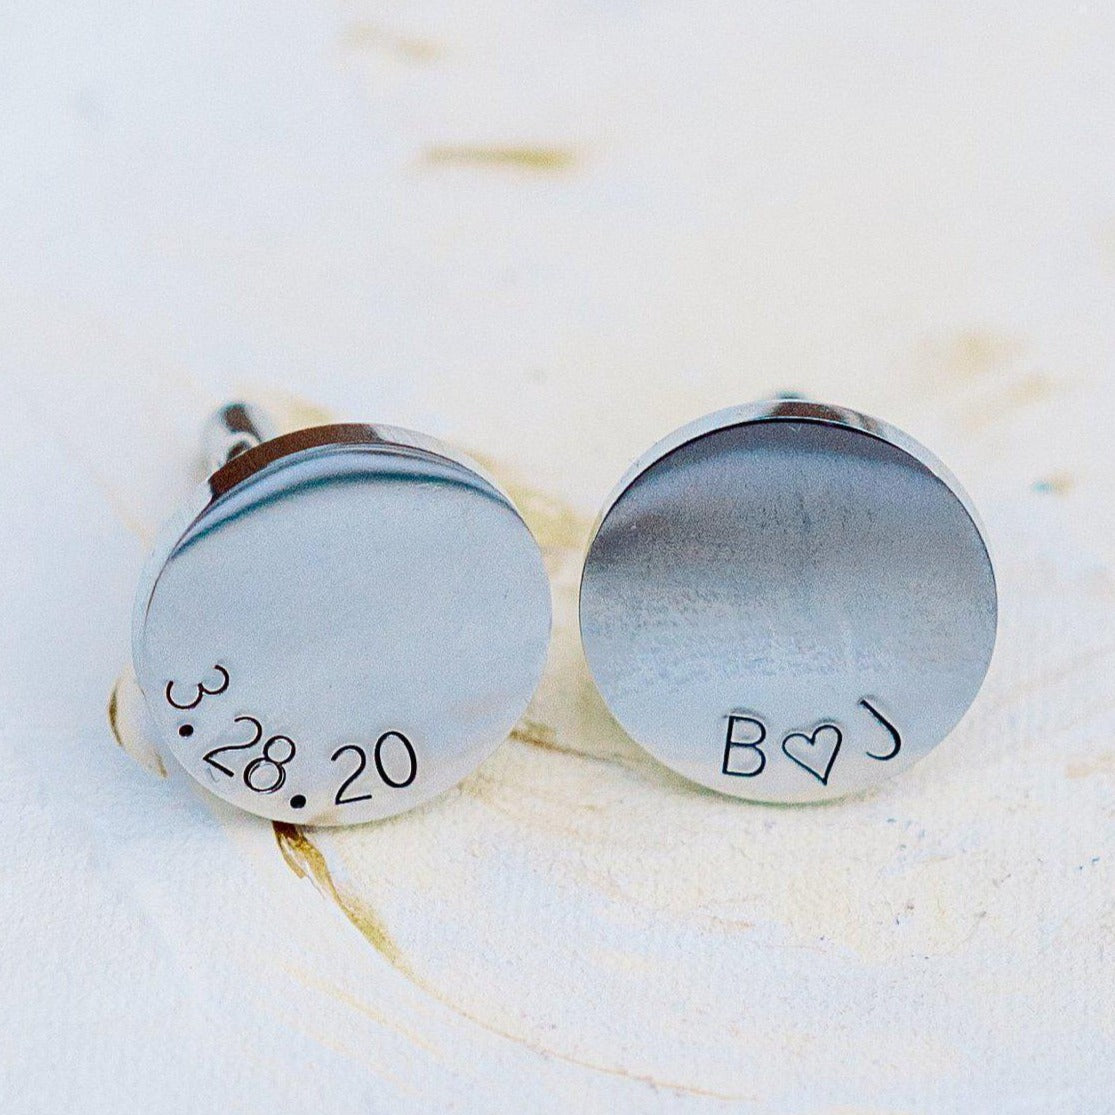 Personalized Silver Circle Cuff Links Salt and Sparkle